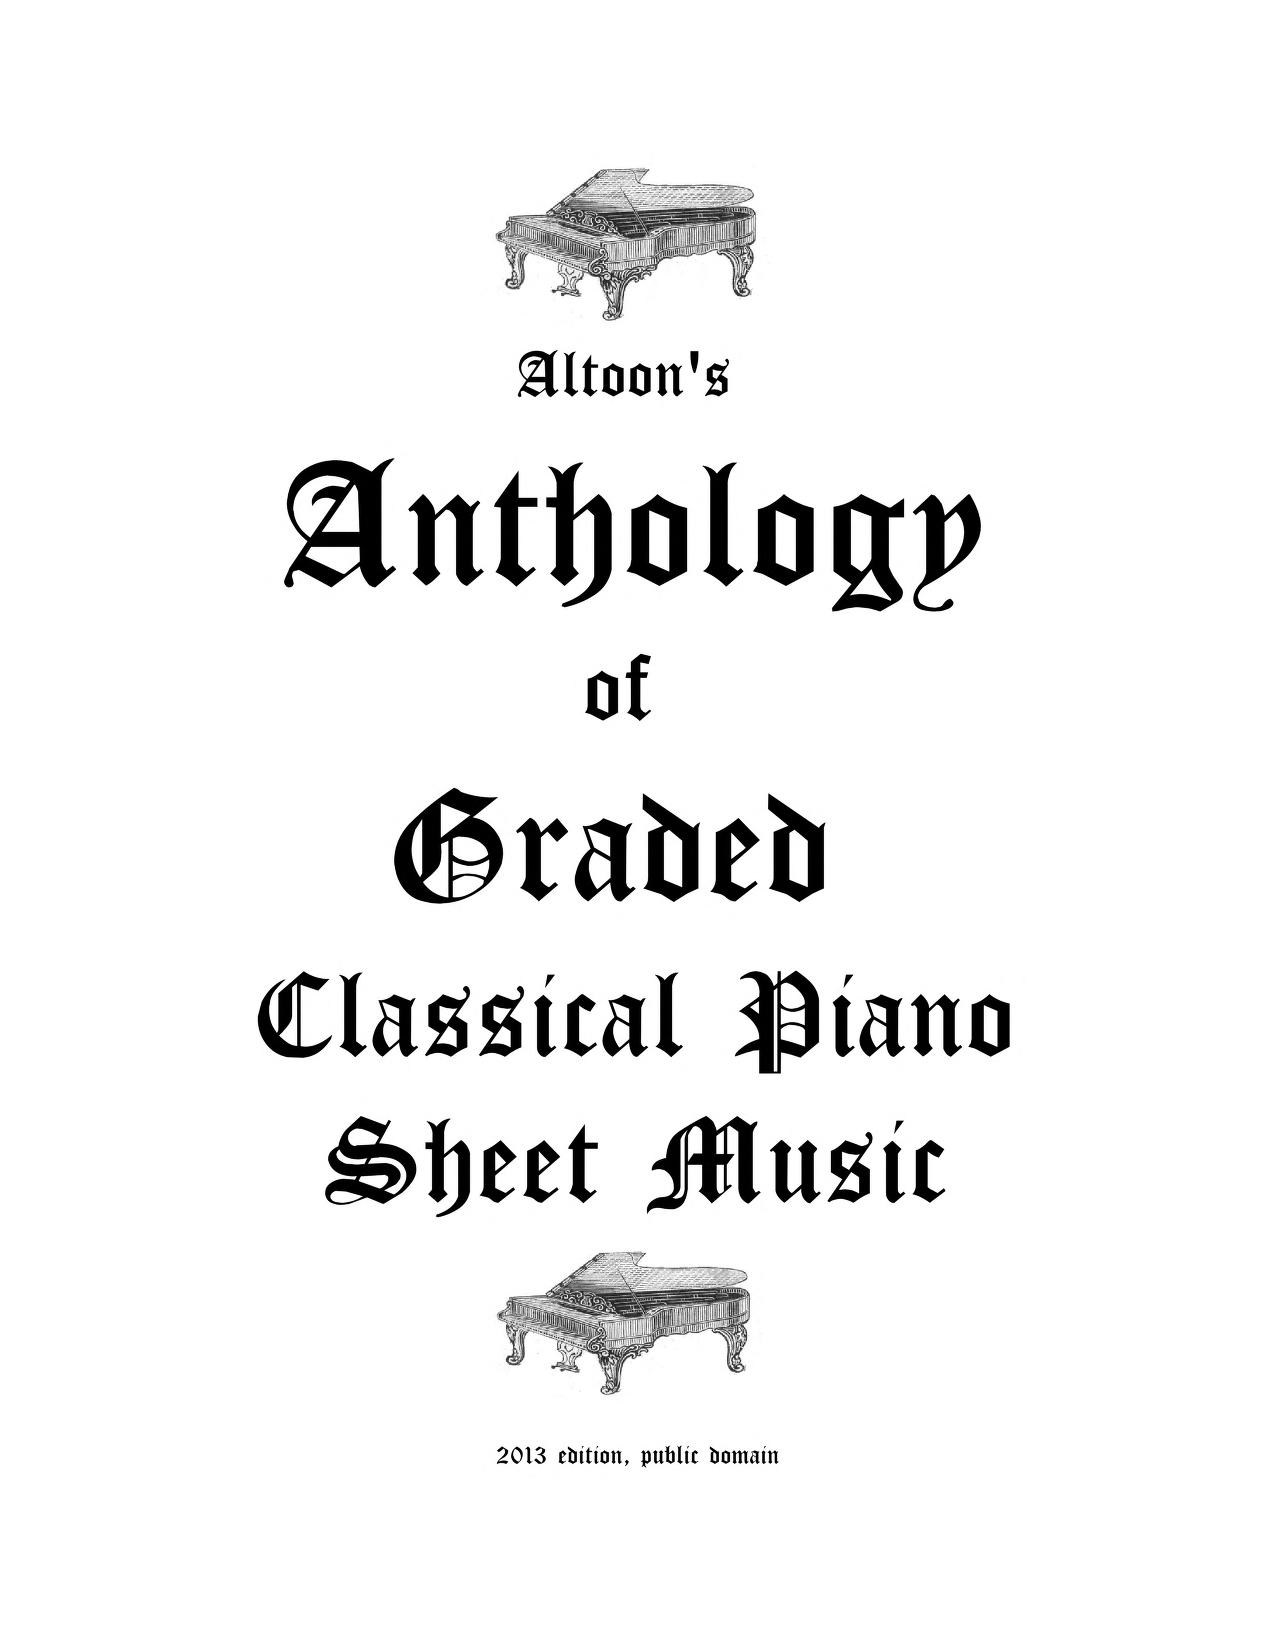 playa emprender Listo Altoon's Anthology of Graded Classical Piano Sheet Music : Free Download,  Borrow, and Streaming : Internet Archive